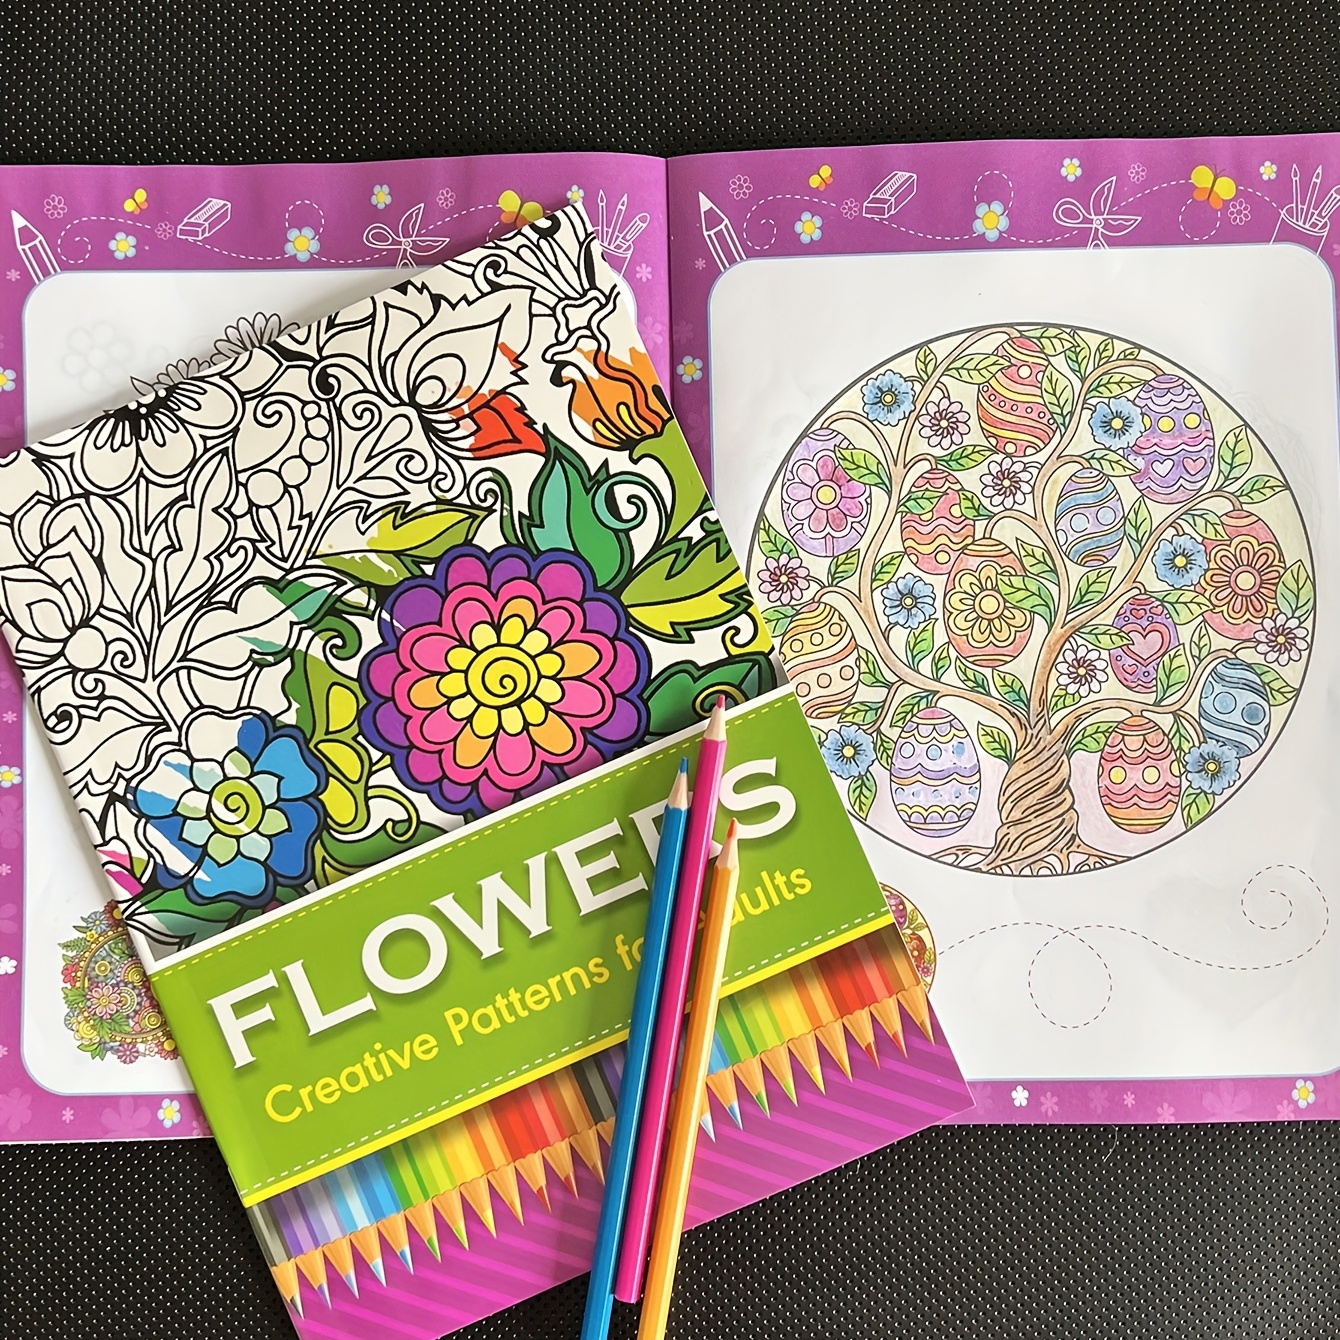 Creative Charm Coloring Book for Adults with Color Pencils - China